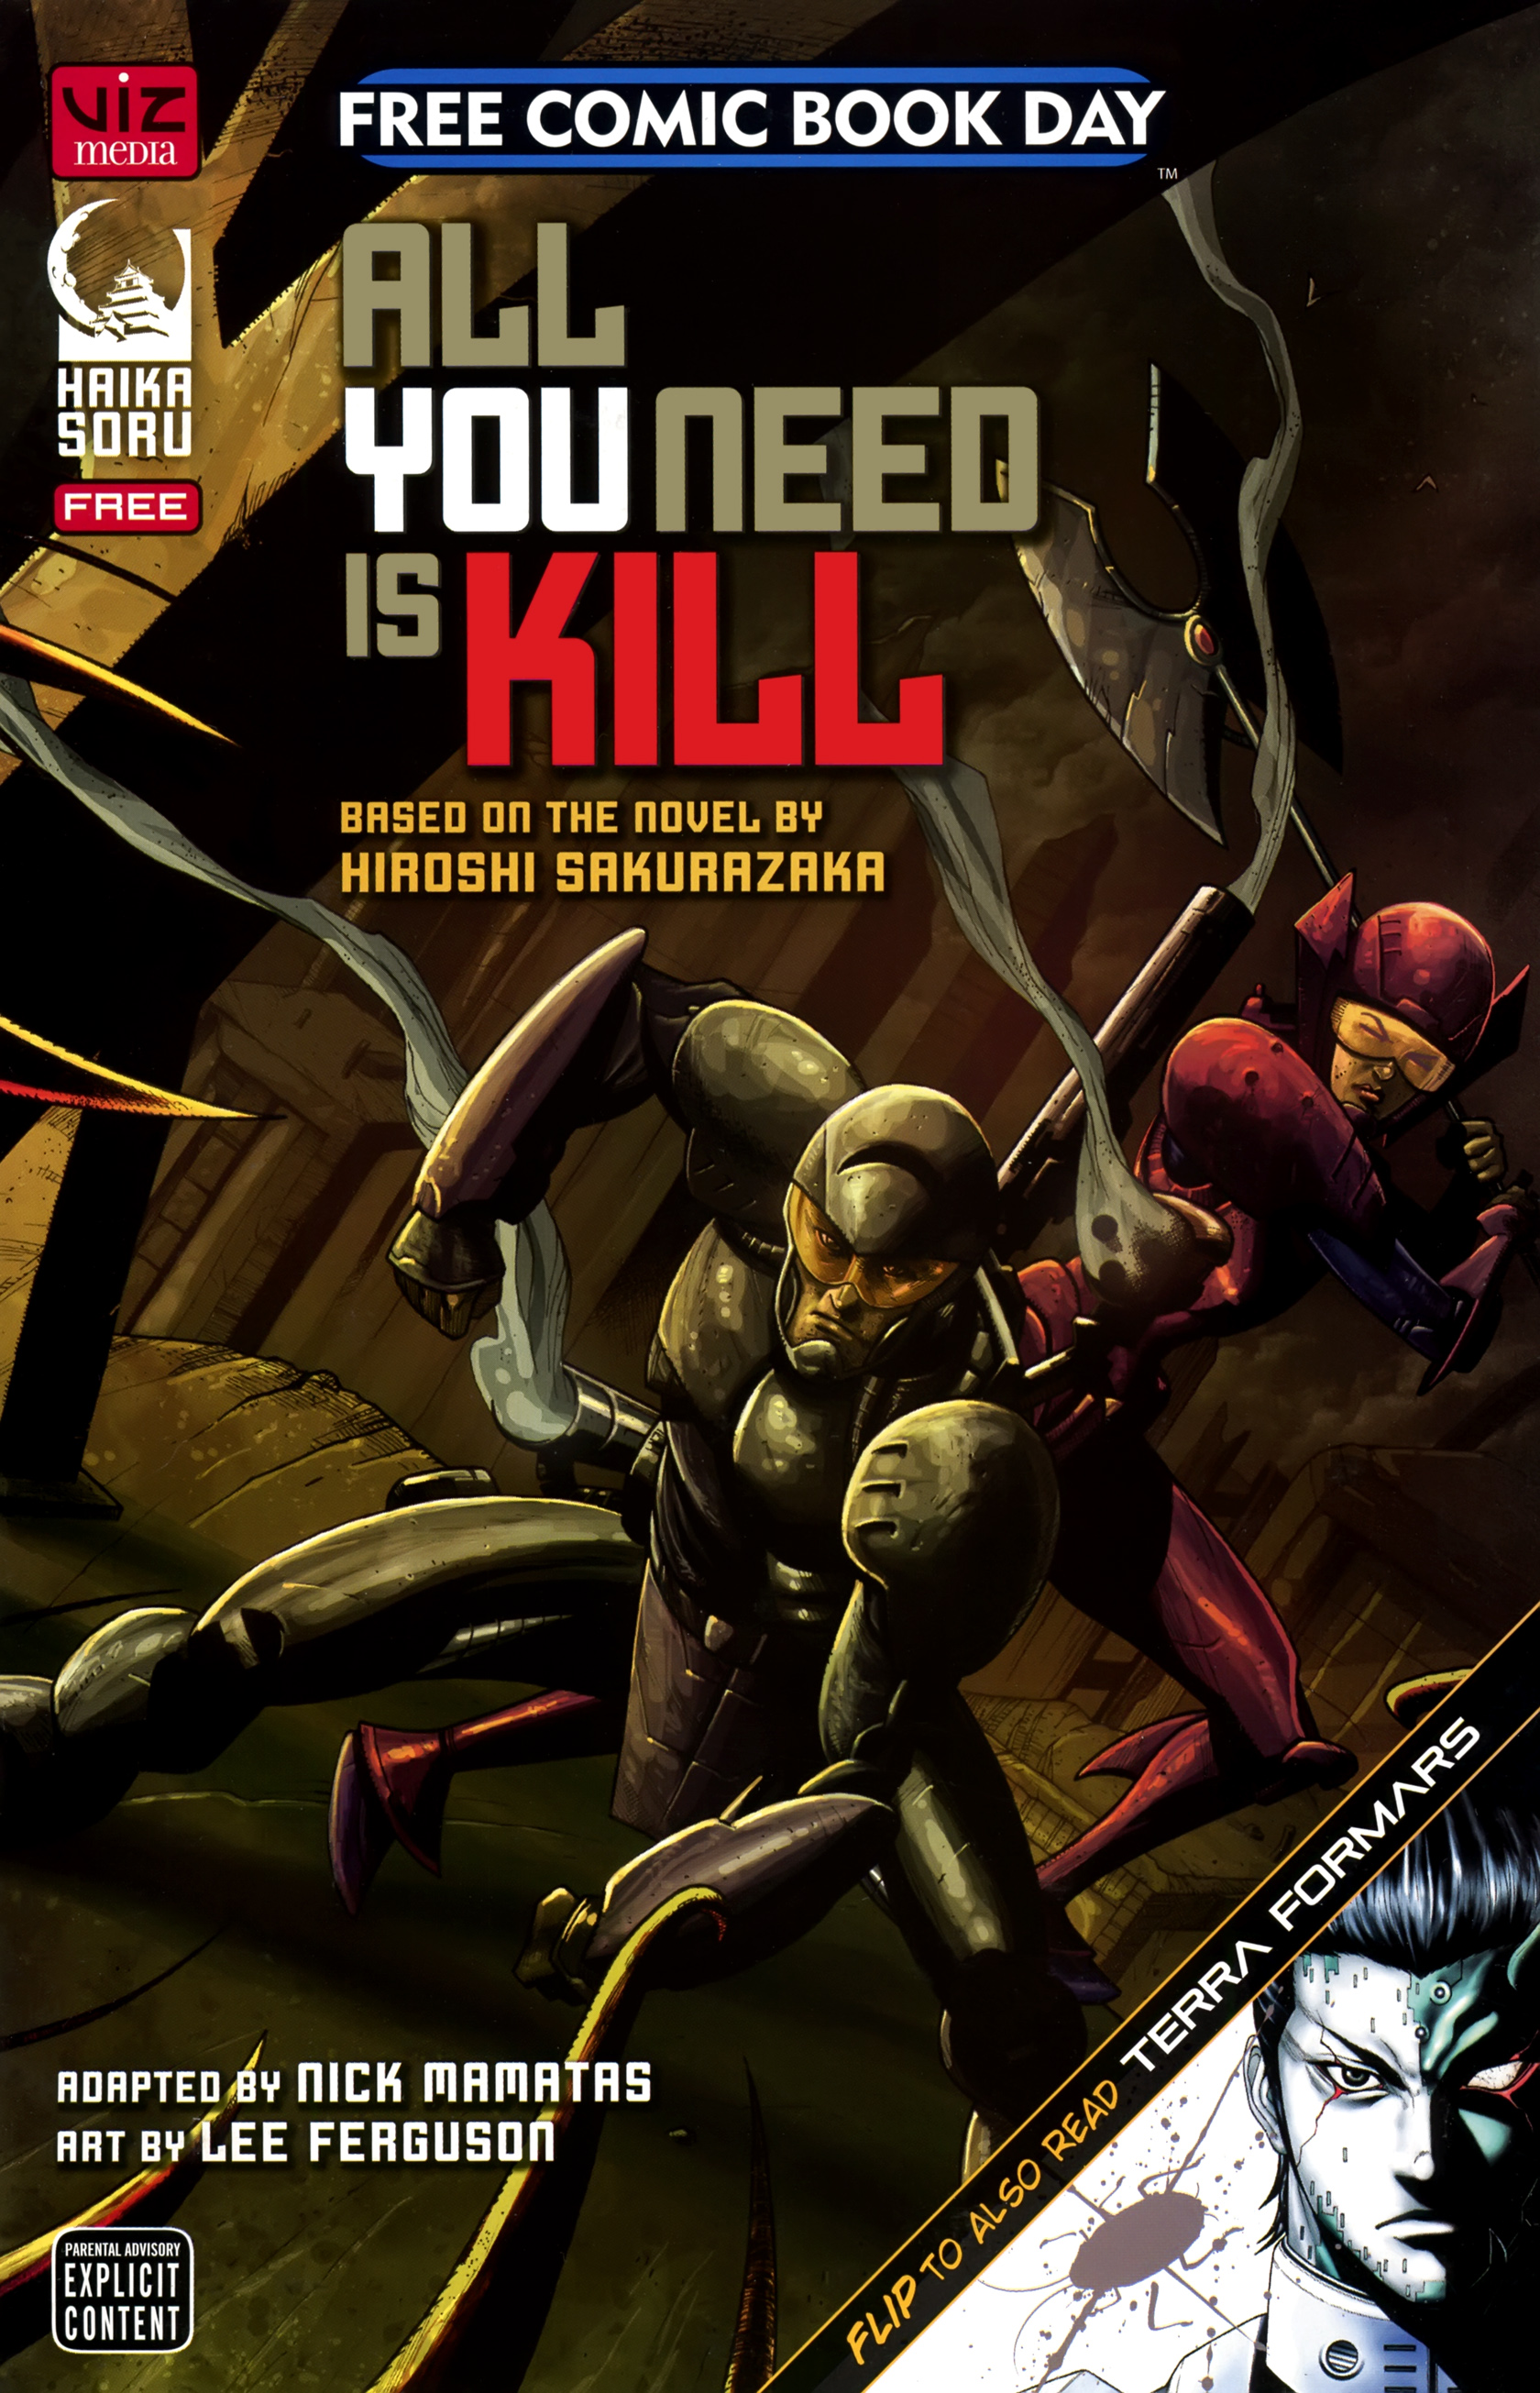 Read online Free Comic Book Day 2014 comic -  Issue # All You Need is Kill-Terra Formars - Free Comic Book Day Edition - 1